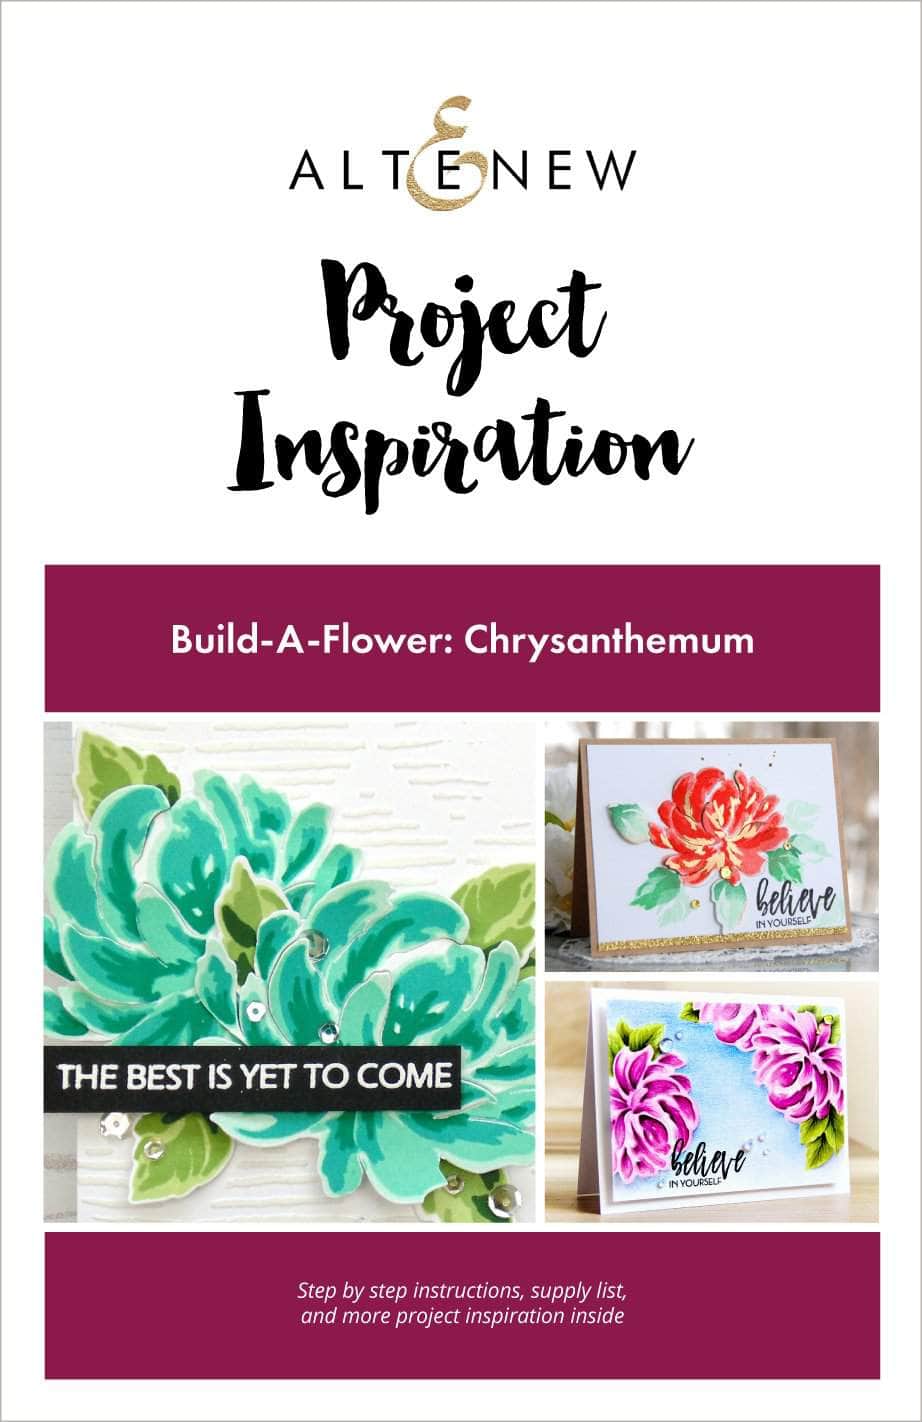 Printed Media Build-A-Flower: Chrysanthemum Project Inspiration Guide